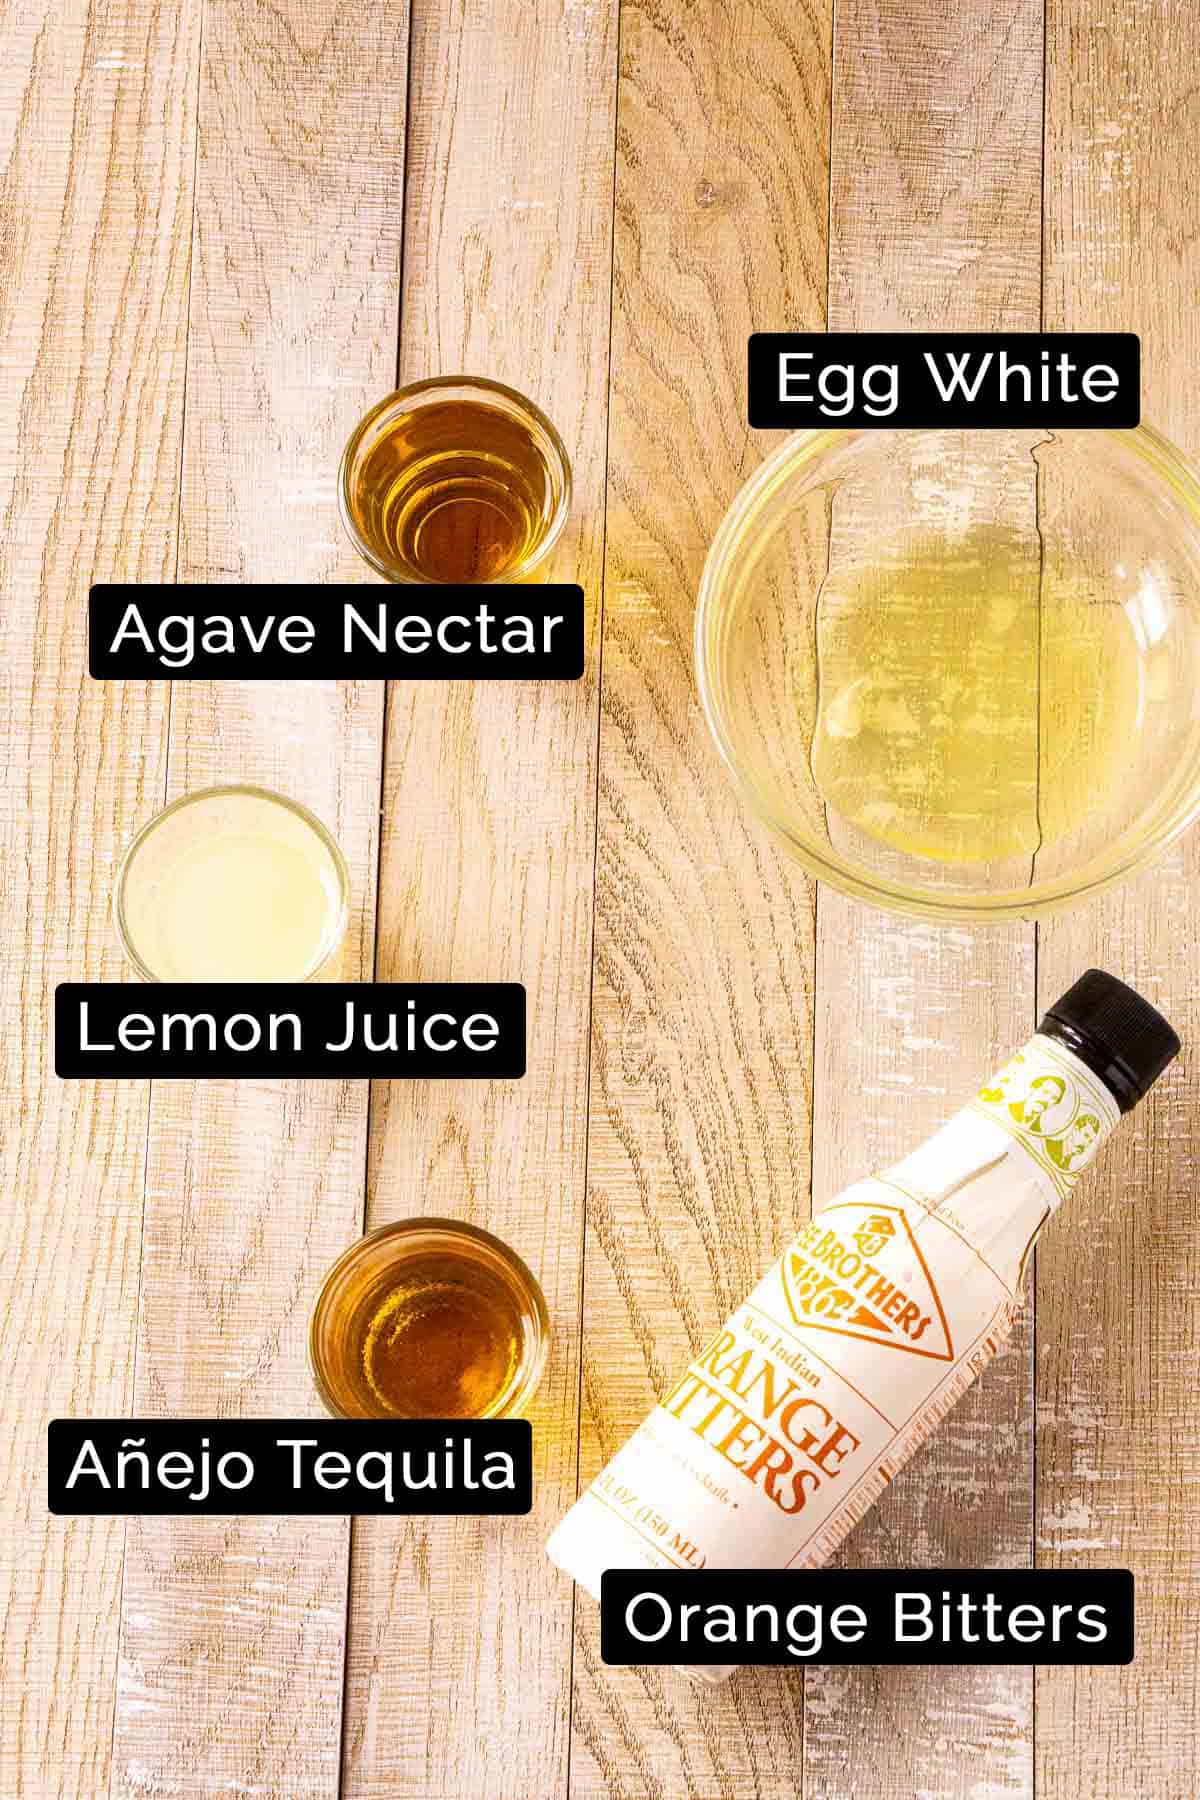 The tequila sour ingredients with black and white labels on a wooden board.